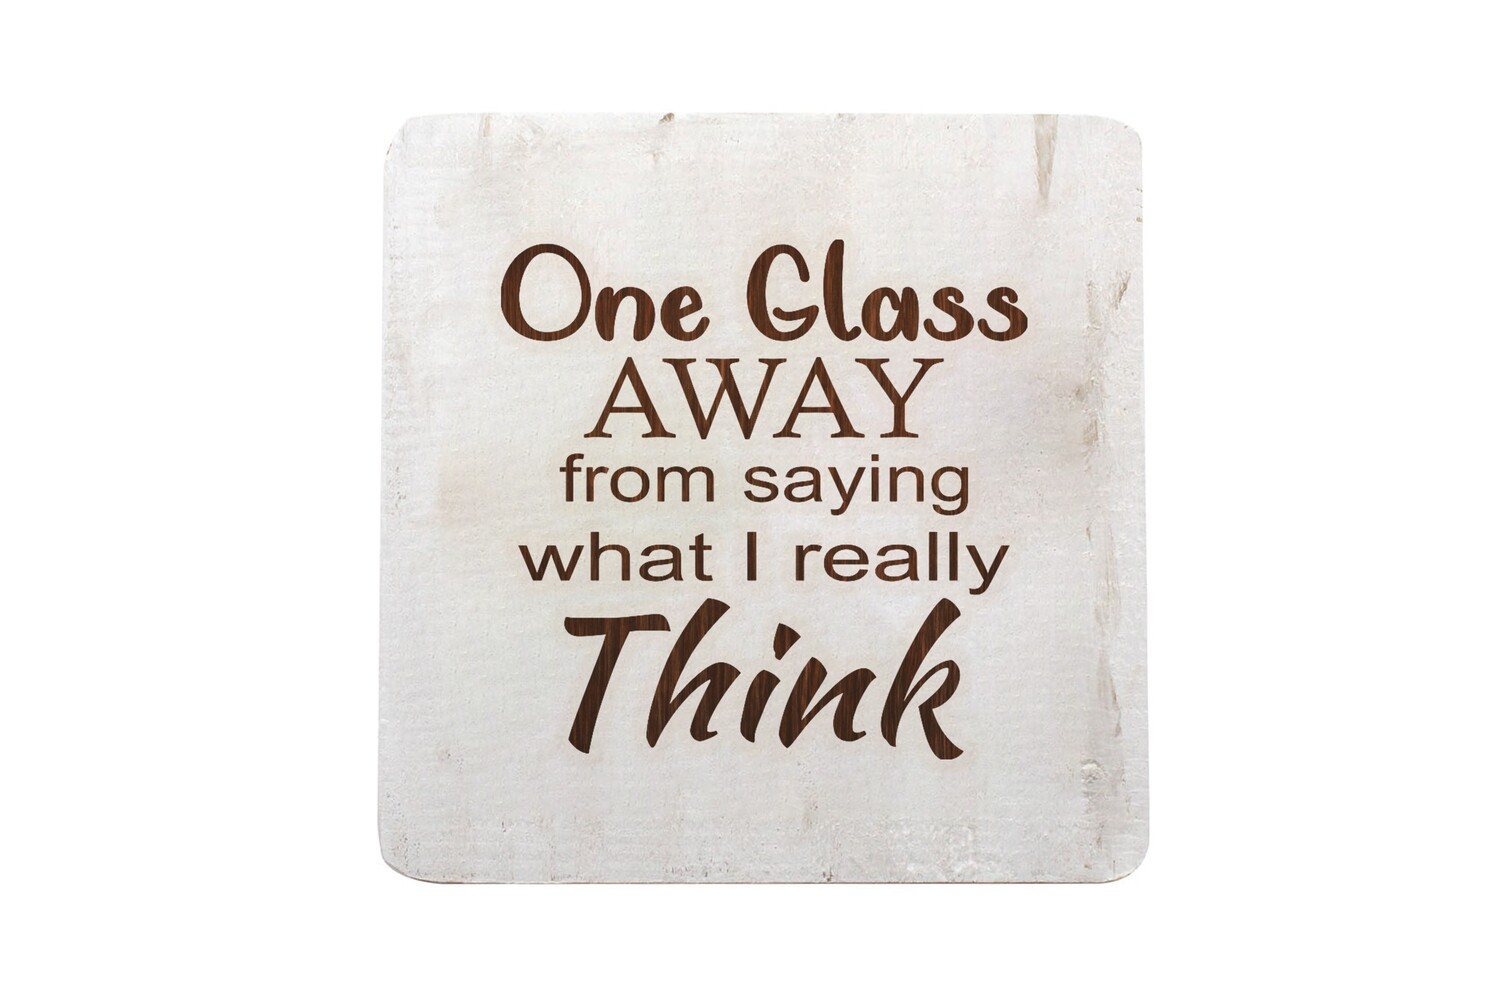 "One Glass Away from saying what I really Think" Hand-Painted Wood Coaster Set